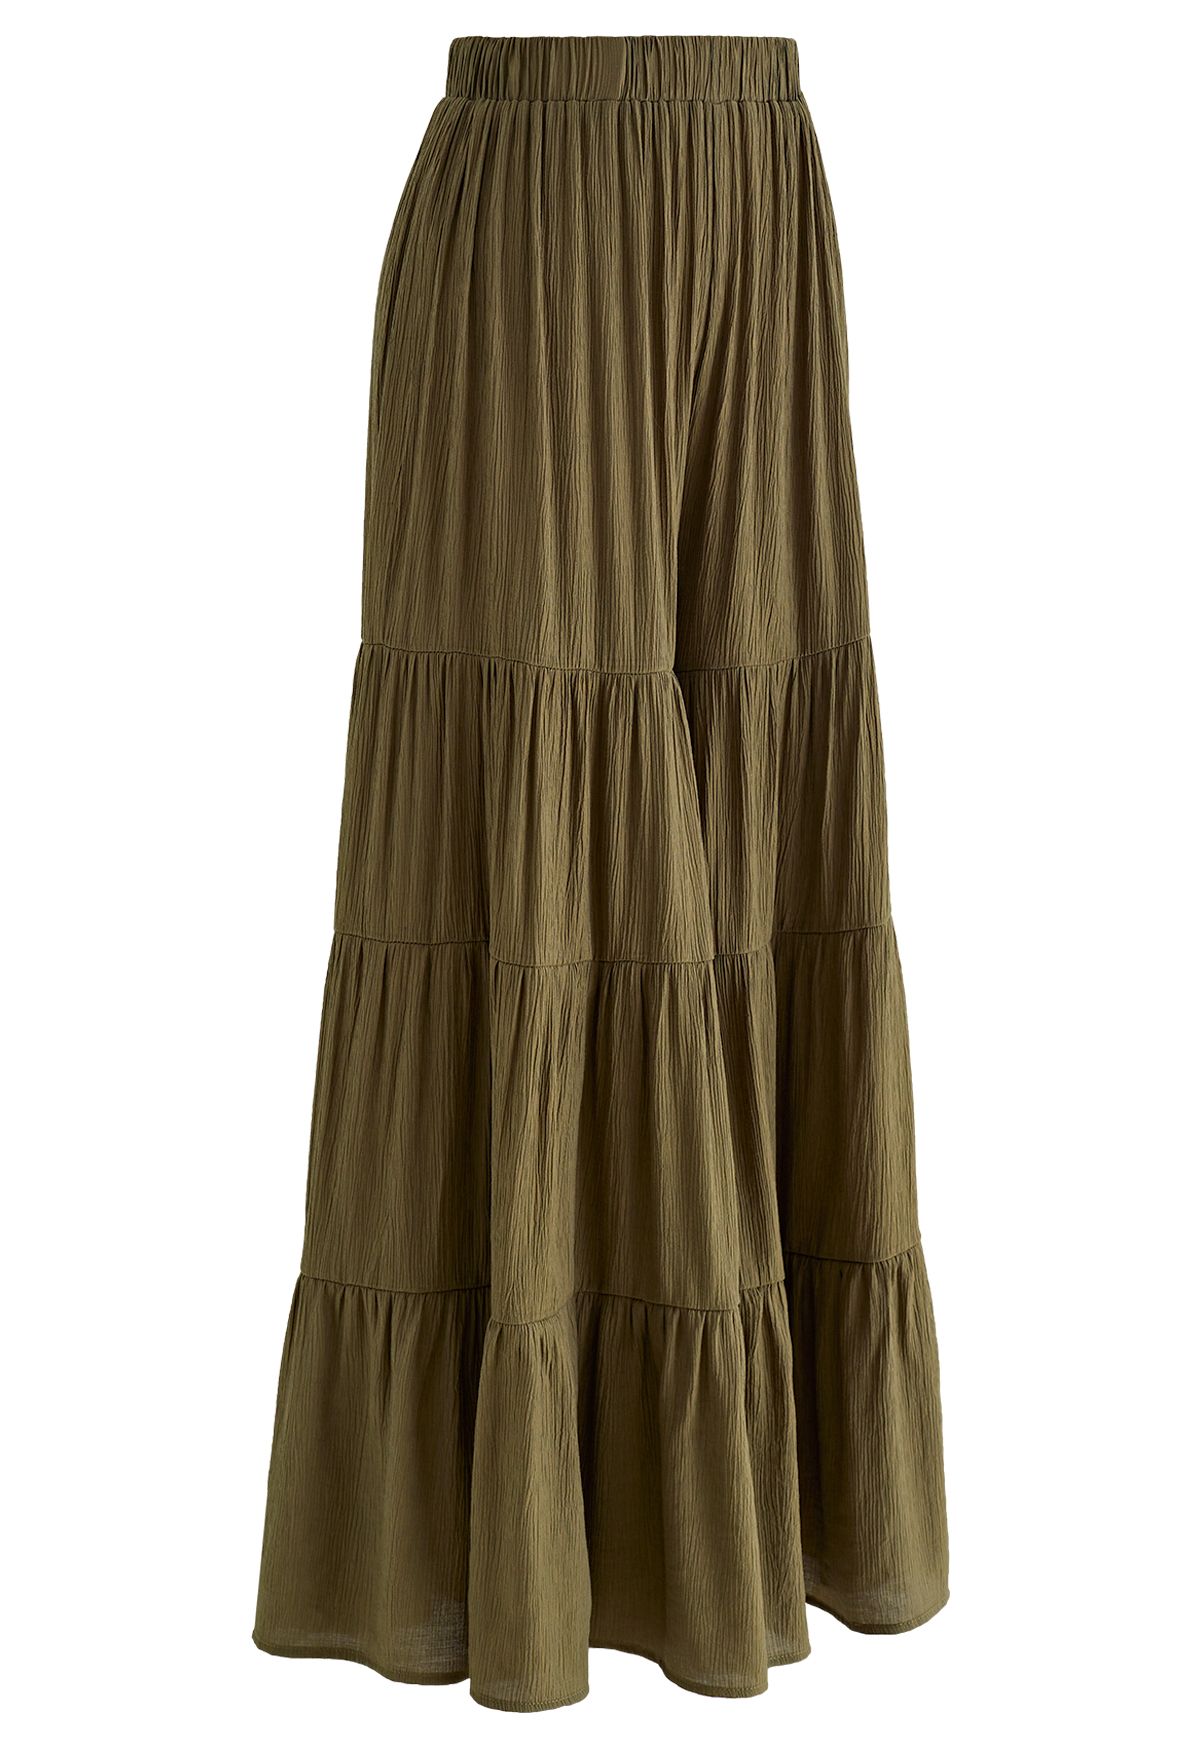 Sunny Days Wide-Leg Pants in Army Green